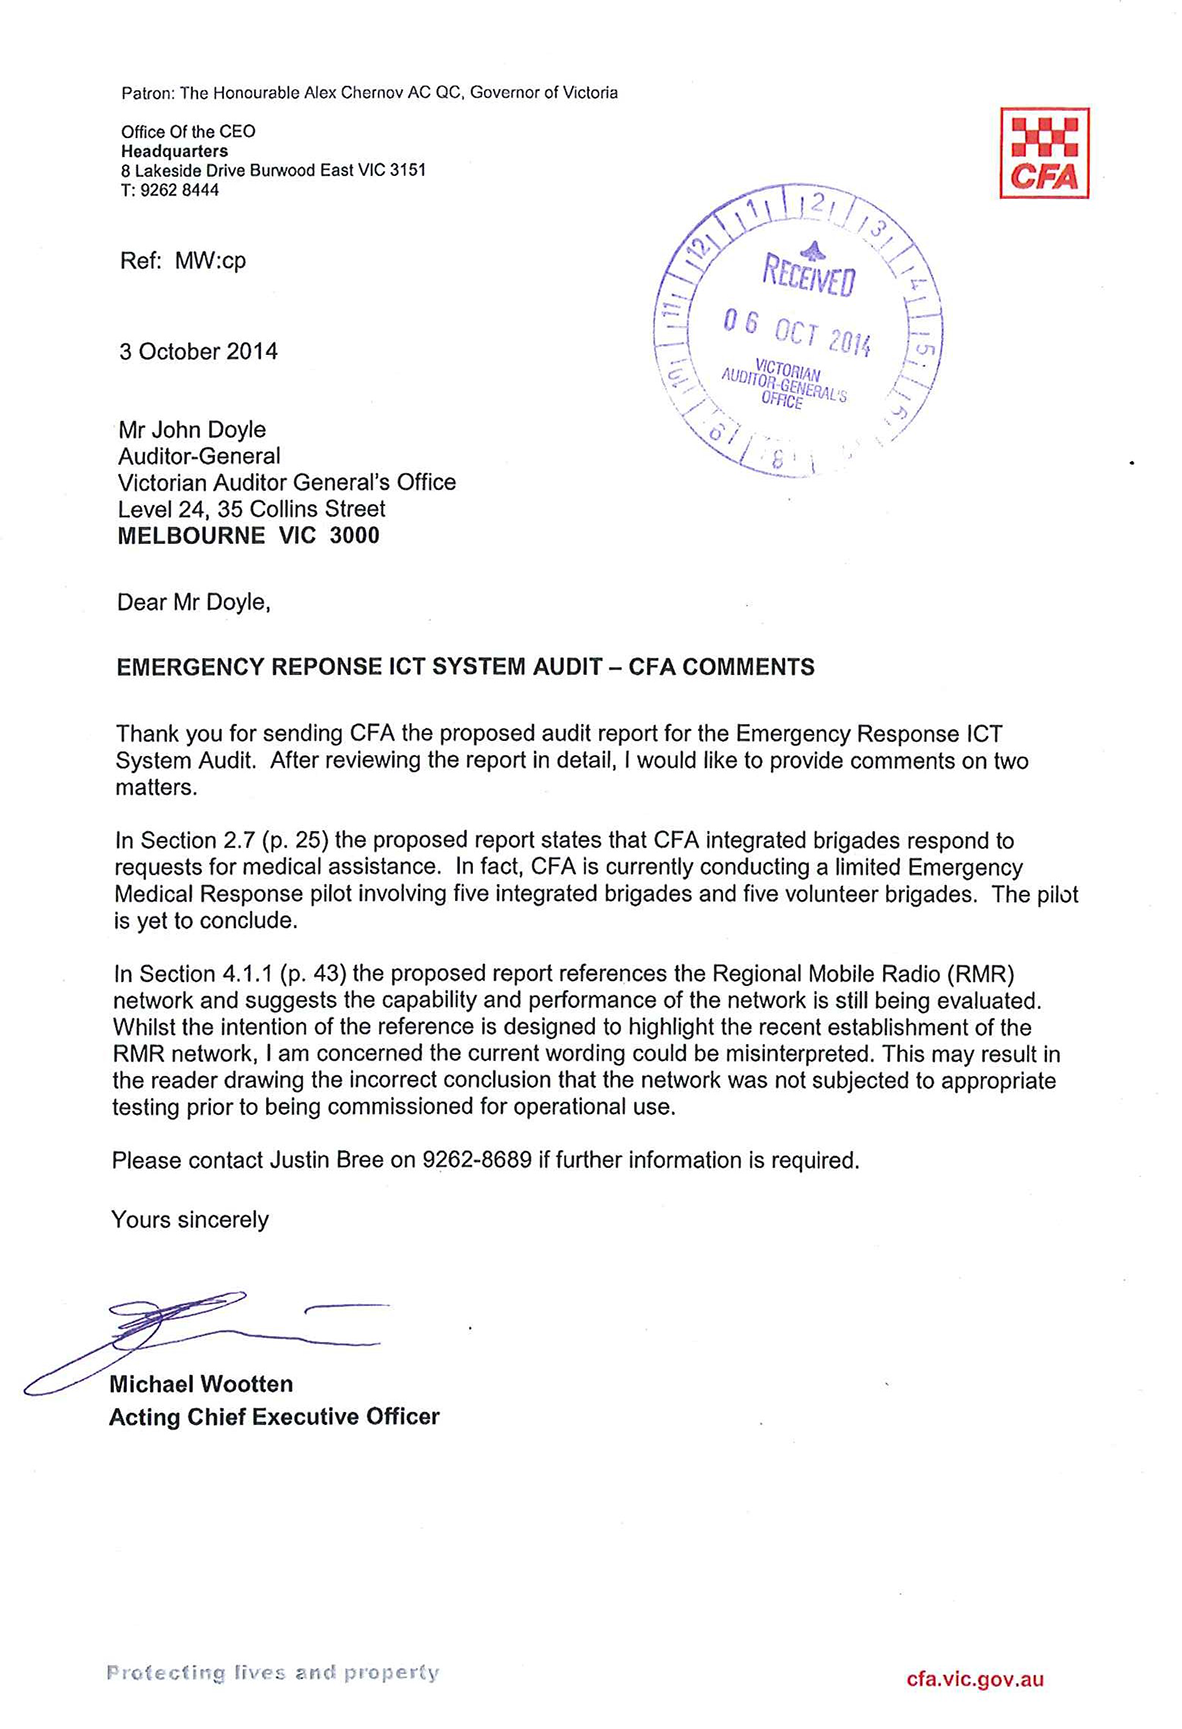 Image shows response provided by the Acting Chief Executive Officer, Country Fire Authority